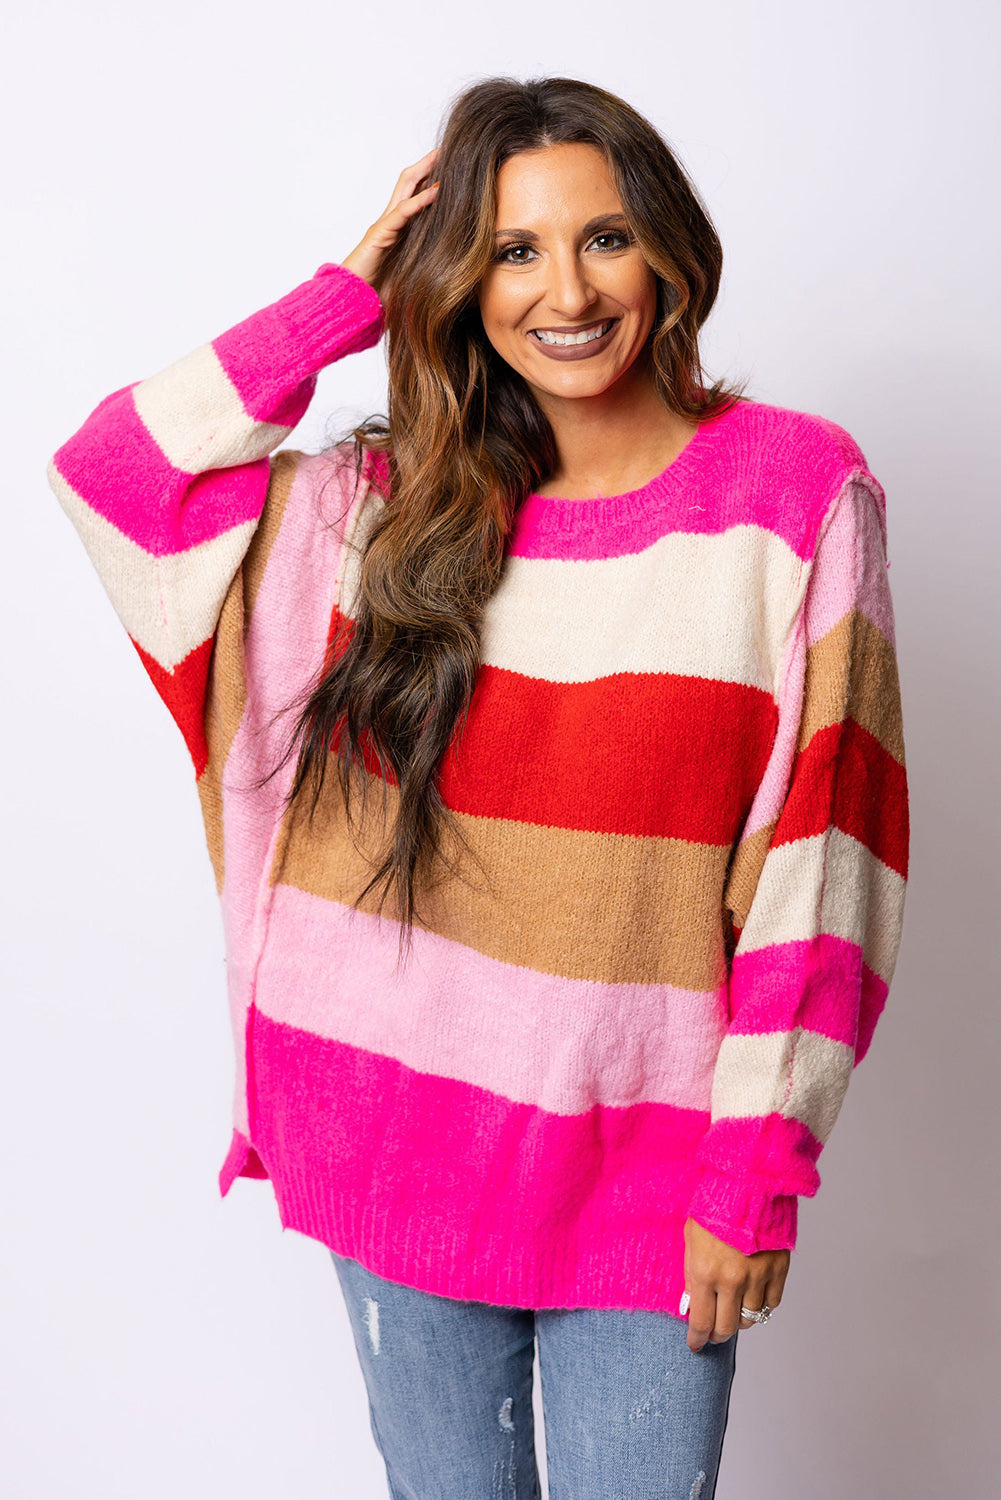 LC2723070-3-S, LC2723070-3-M, LC2723070-3-L, LC2723070-3-XL, Red Mix Horizon Stripes Dolman Sleeve Sweater